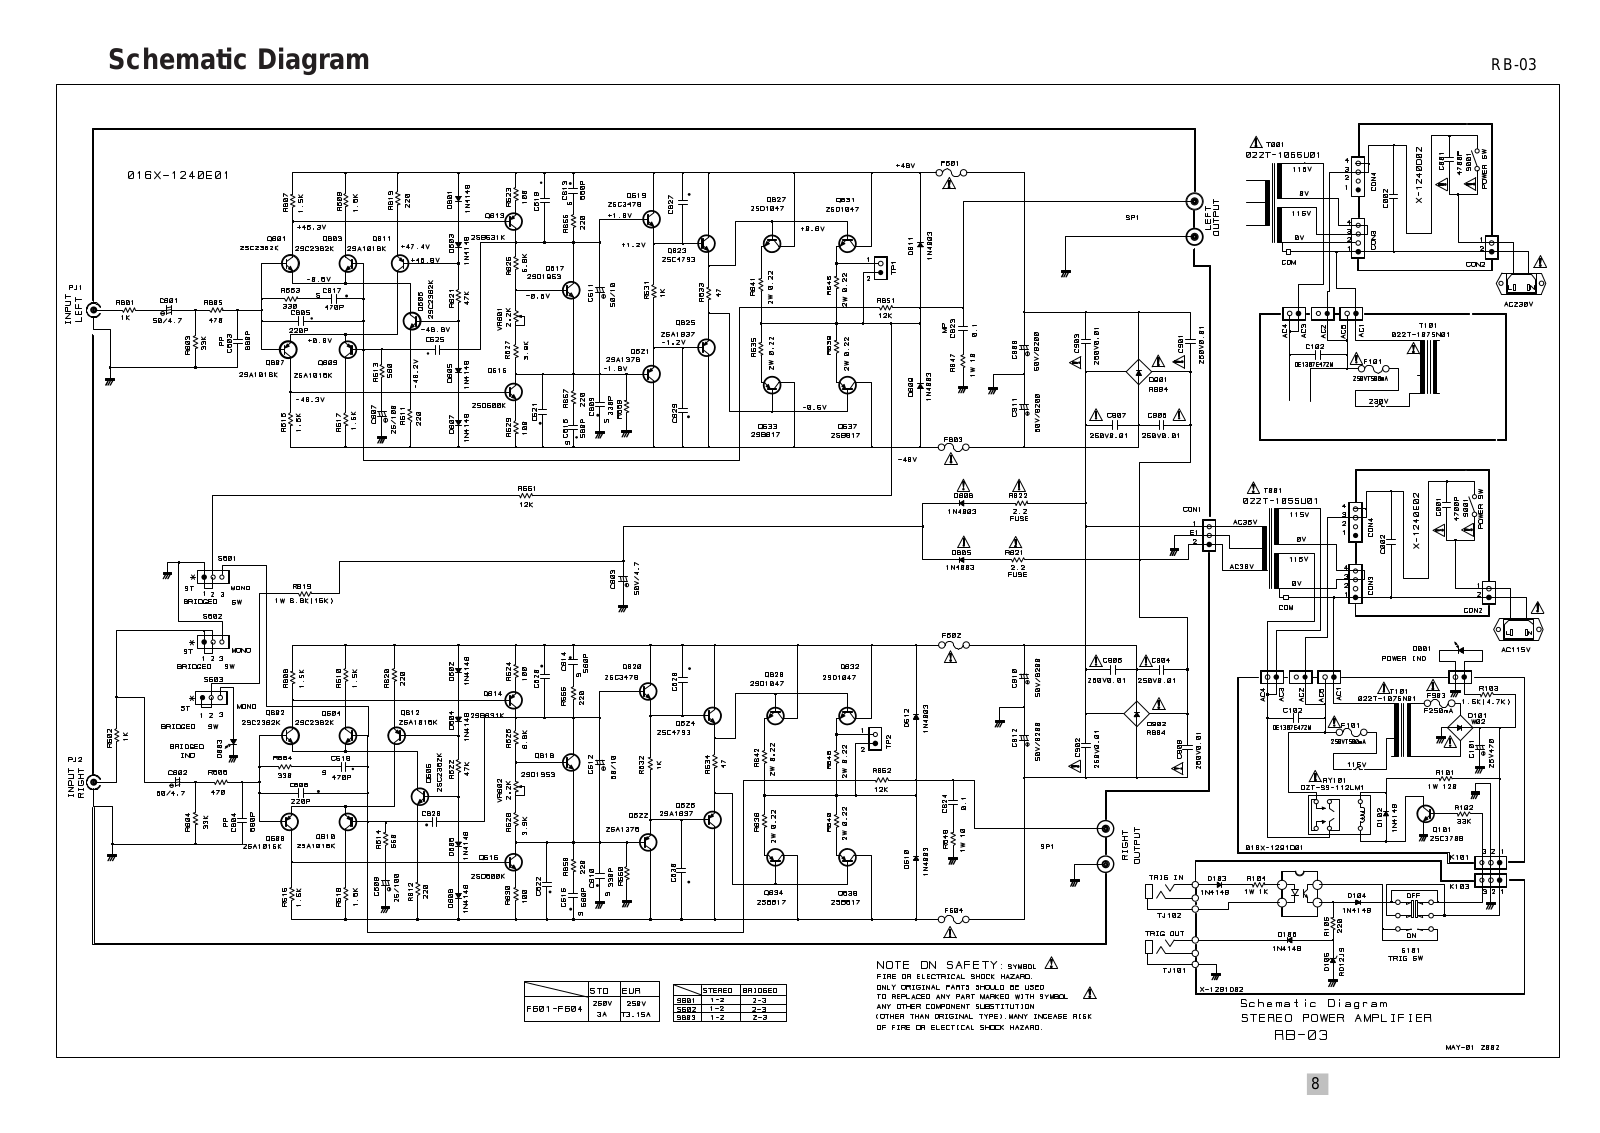 Rotel RB-03 Schematic